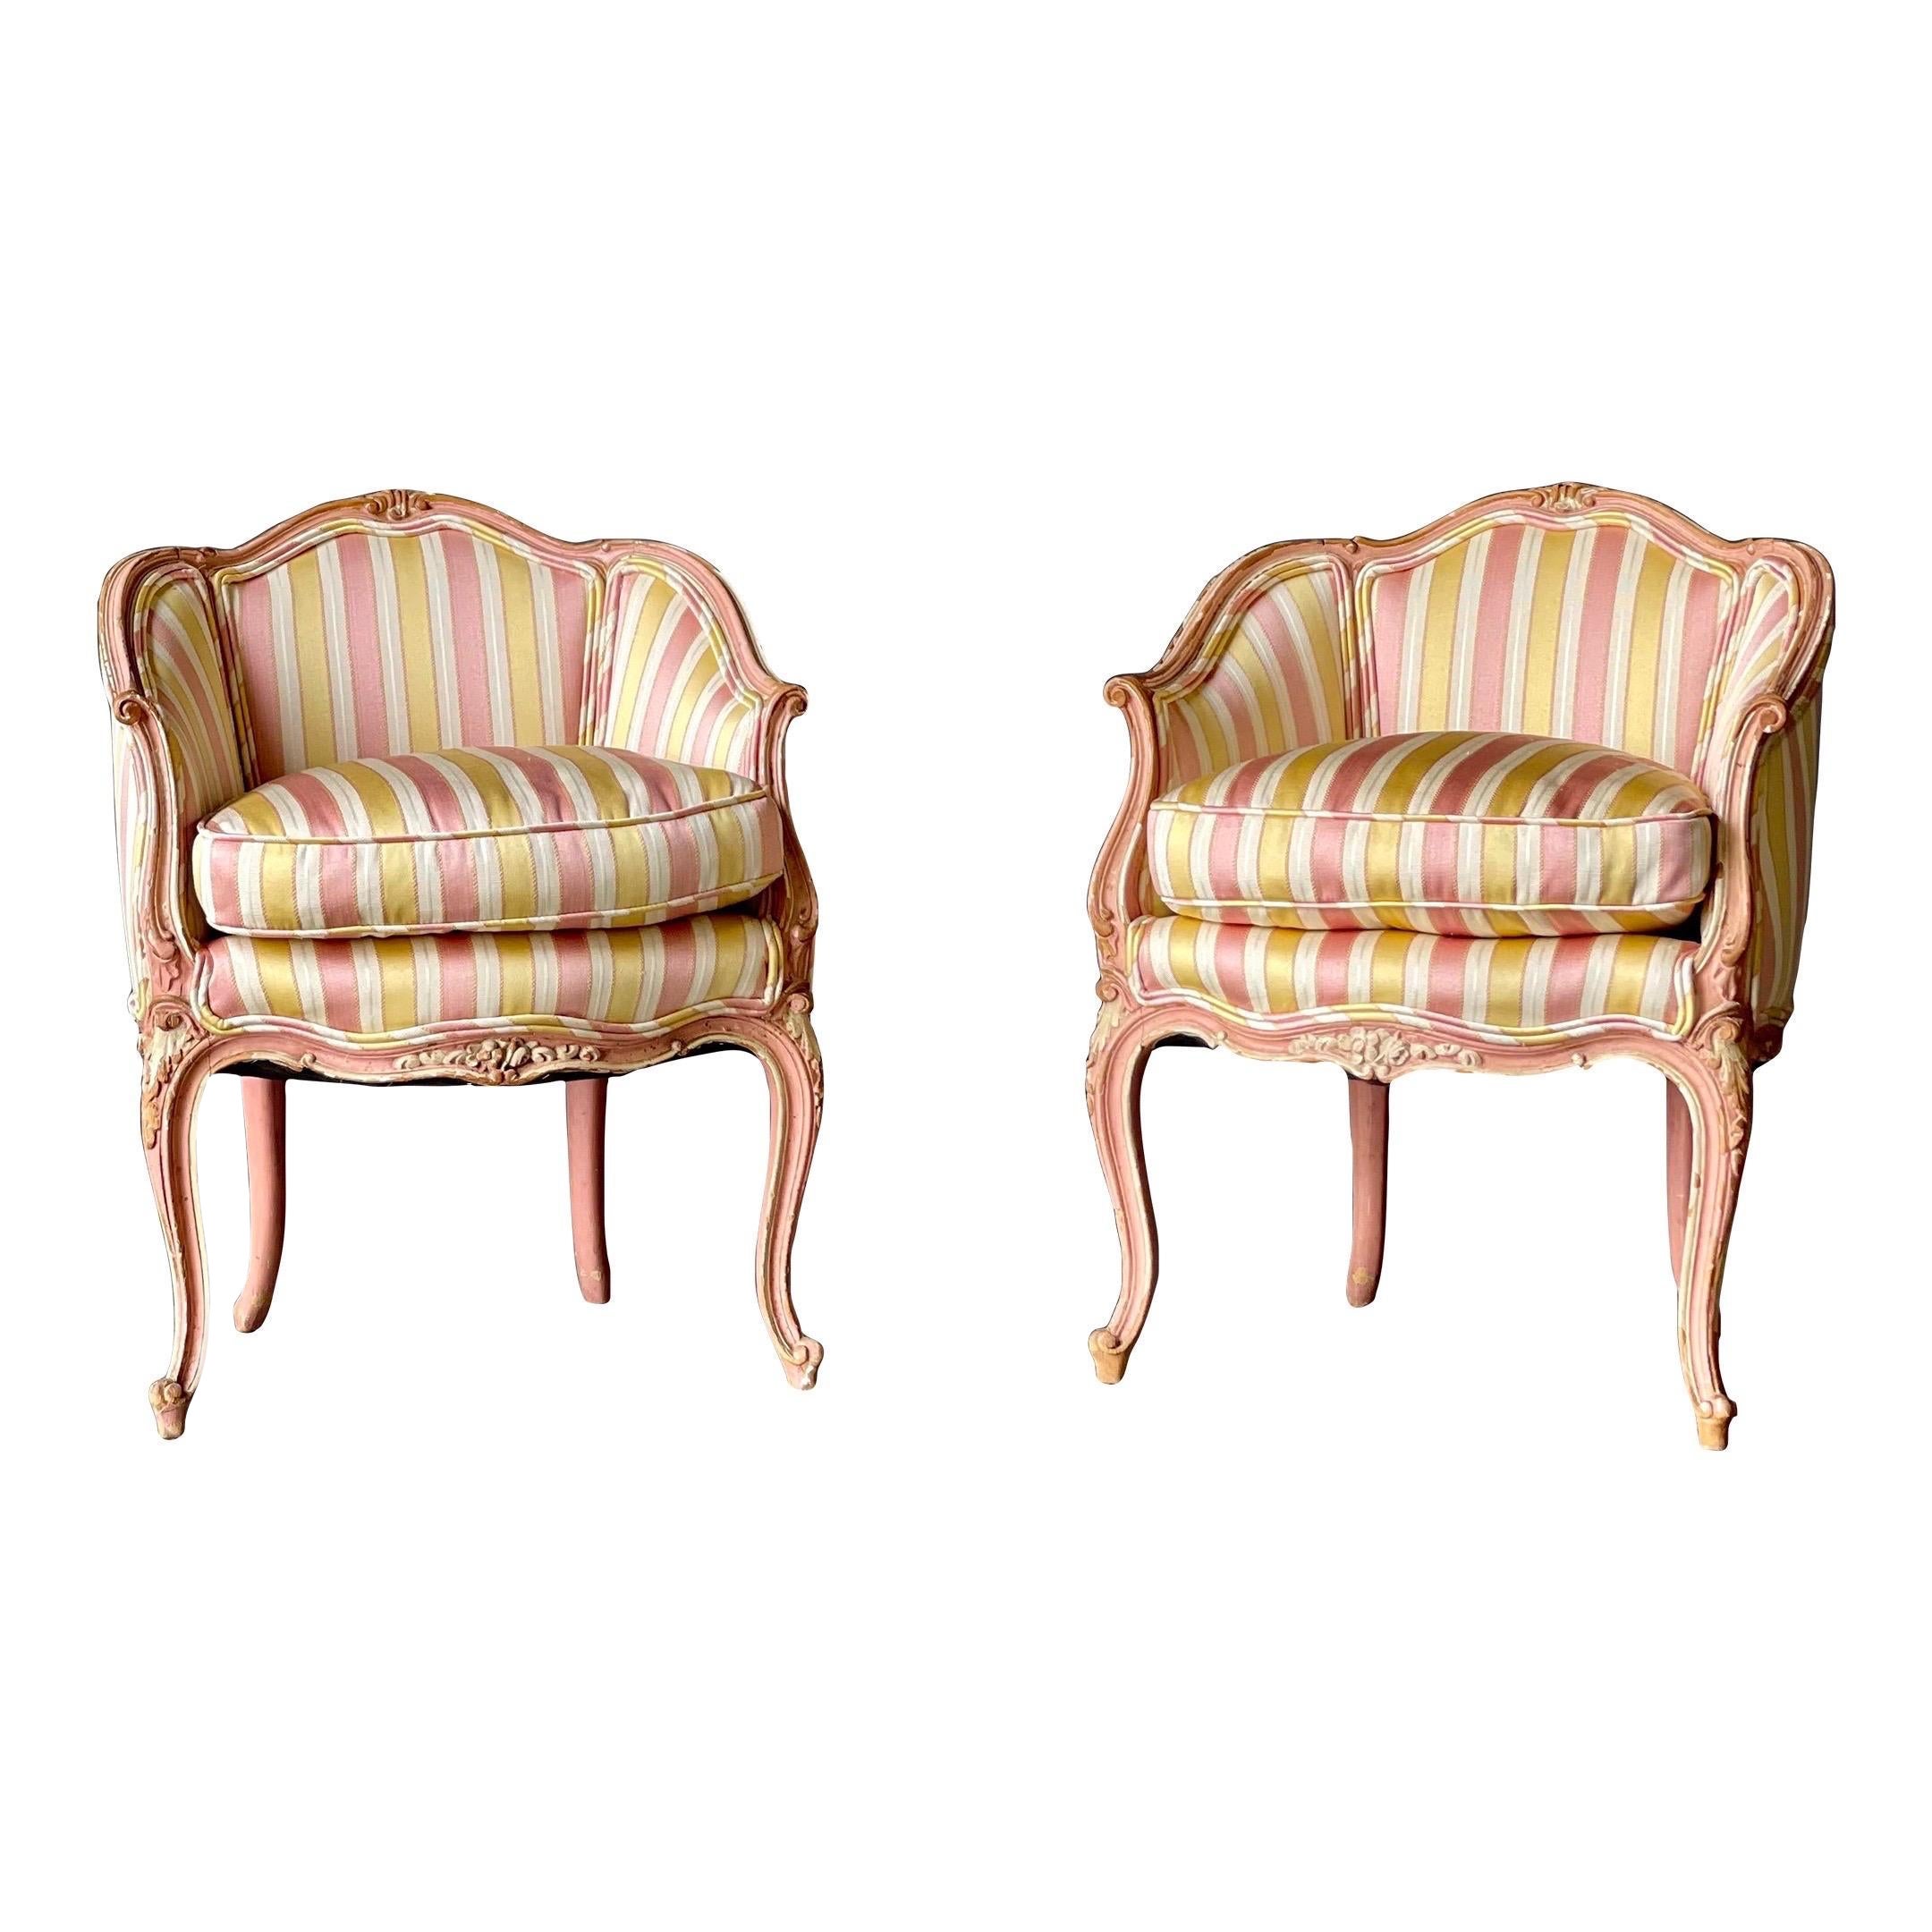 Louis XV Style Bergere Chairs - a Pair